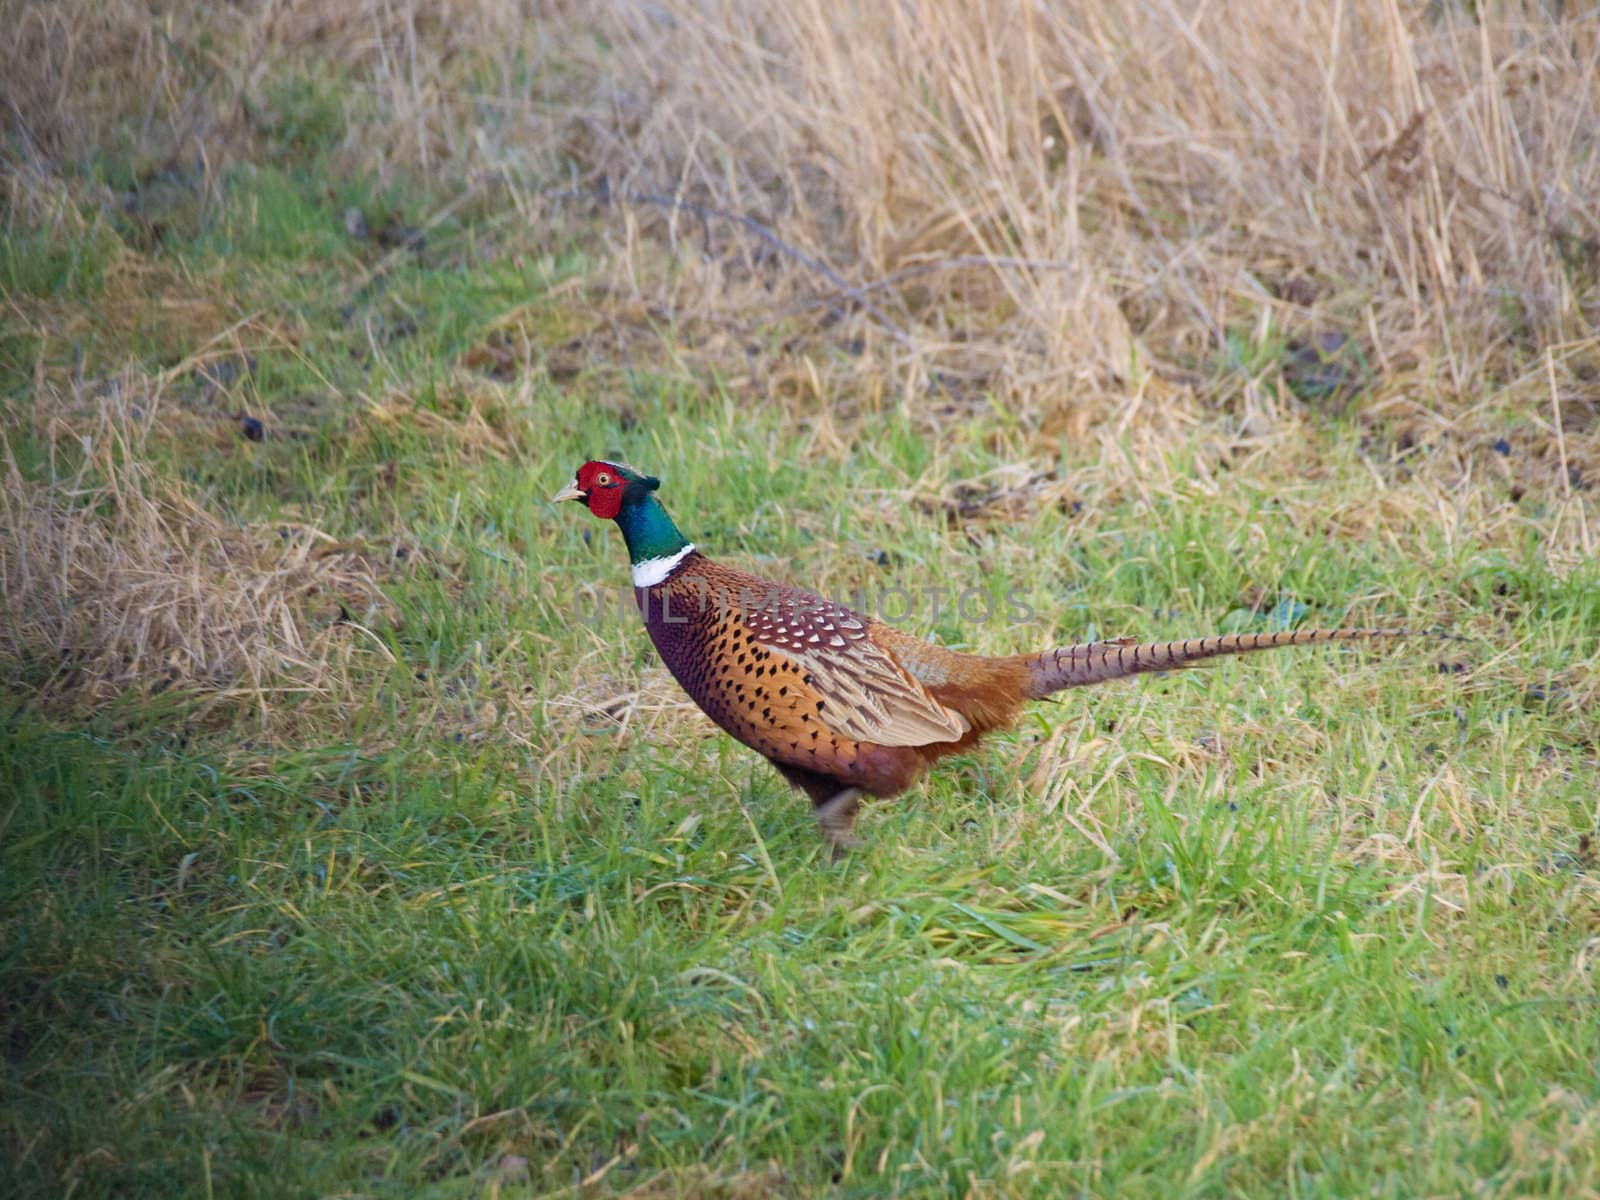 A male pheasant in a field of grass